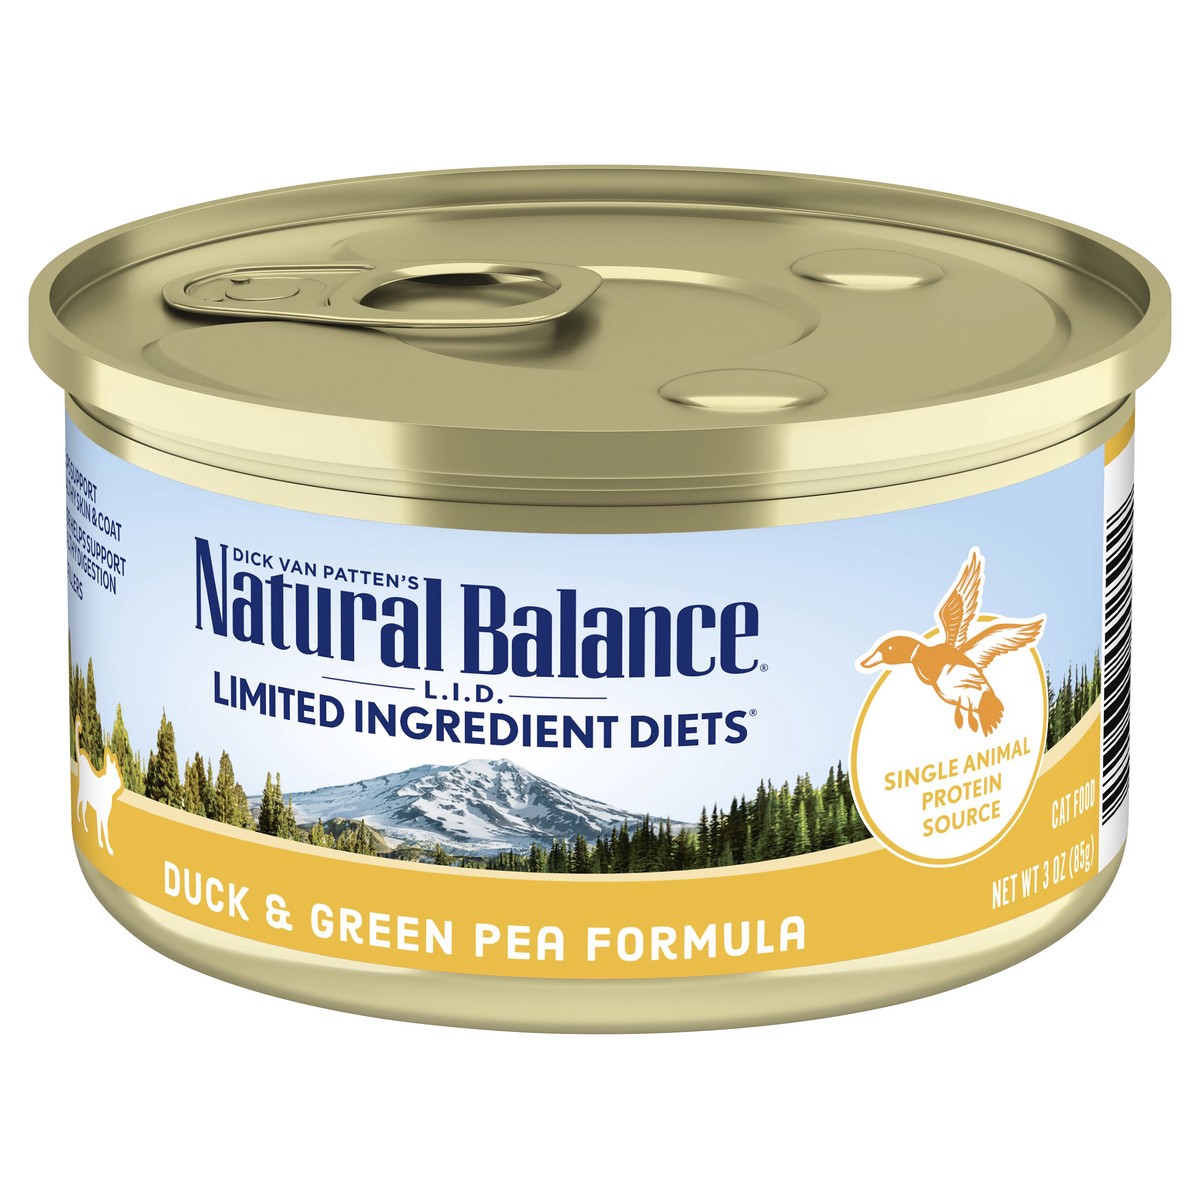 slide 4 of 7, Natural Balance L.I.D. Limited Ingredient Diets Duck & Green Pea Formula Wet Cat Food, 3-Ounce Can, 3 oz